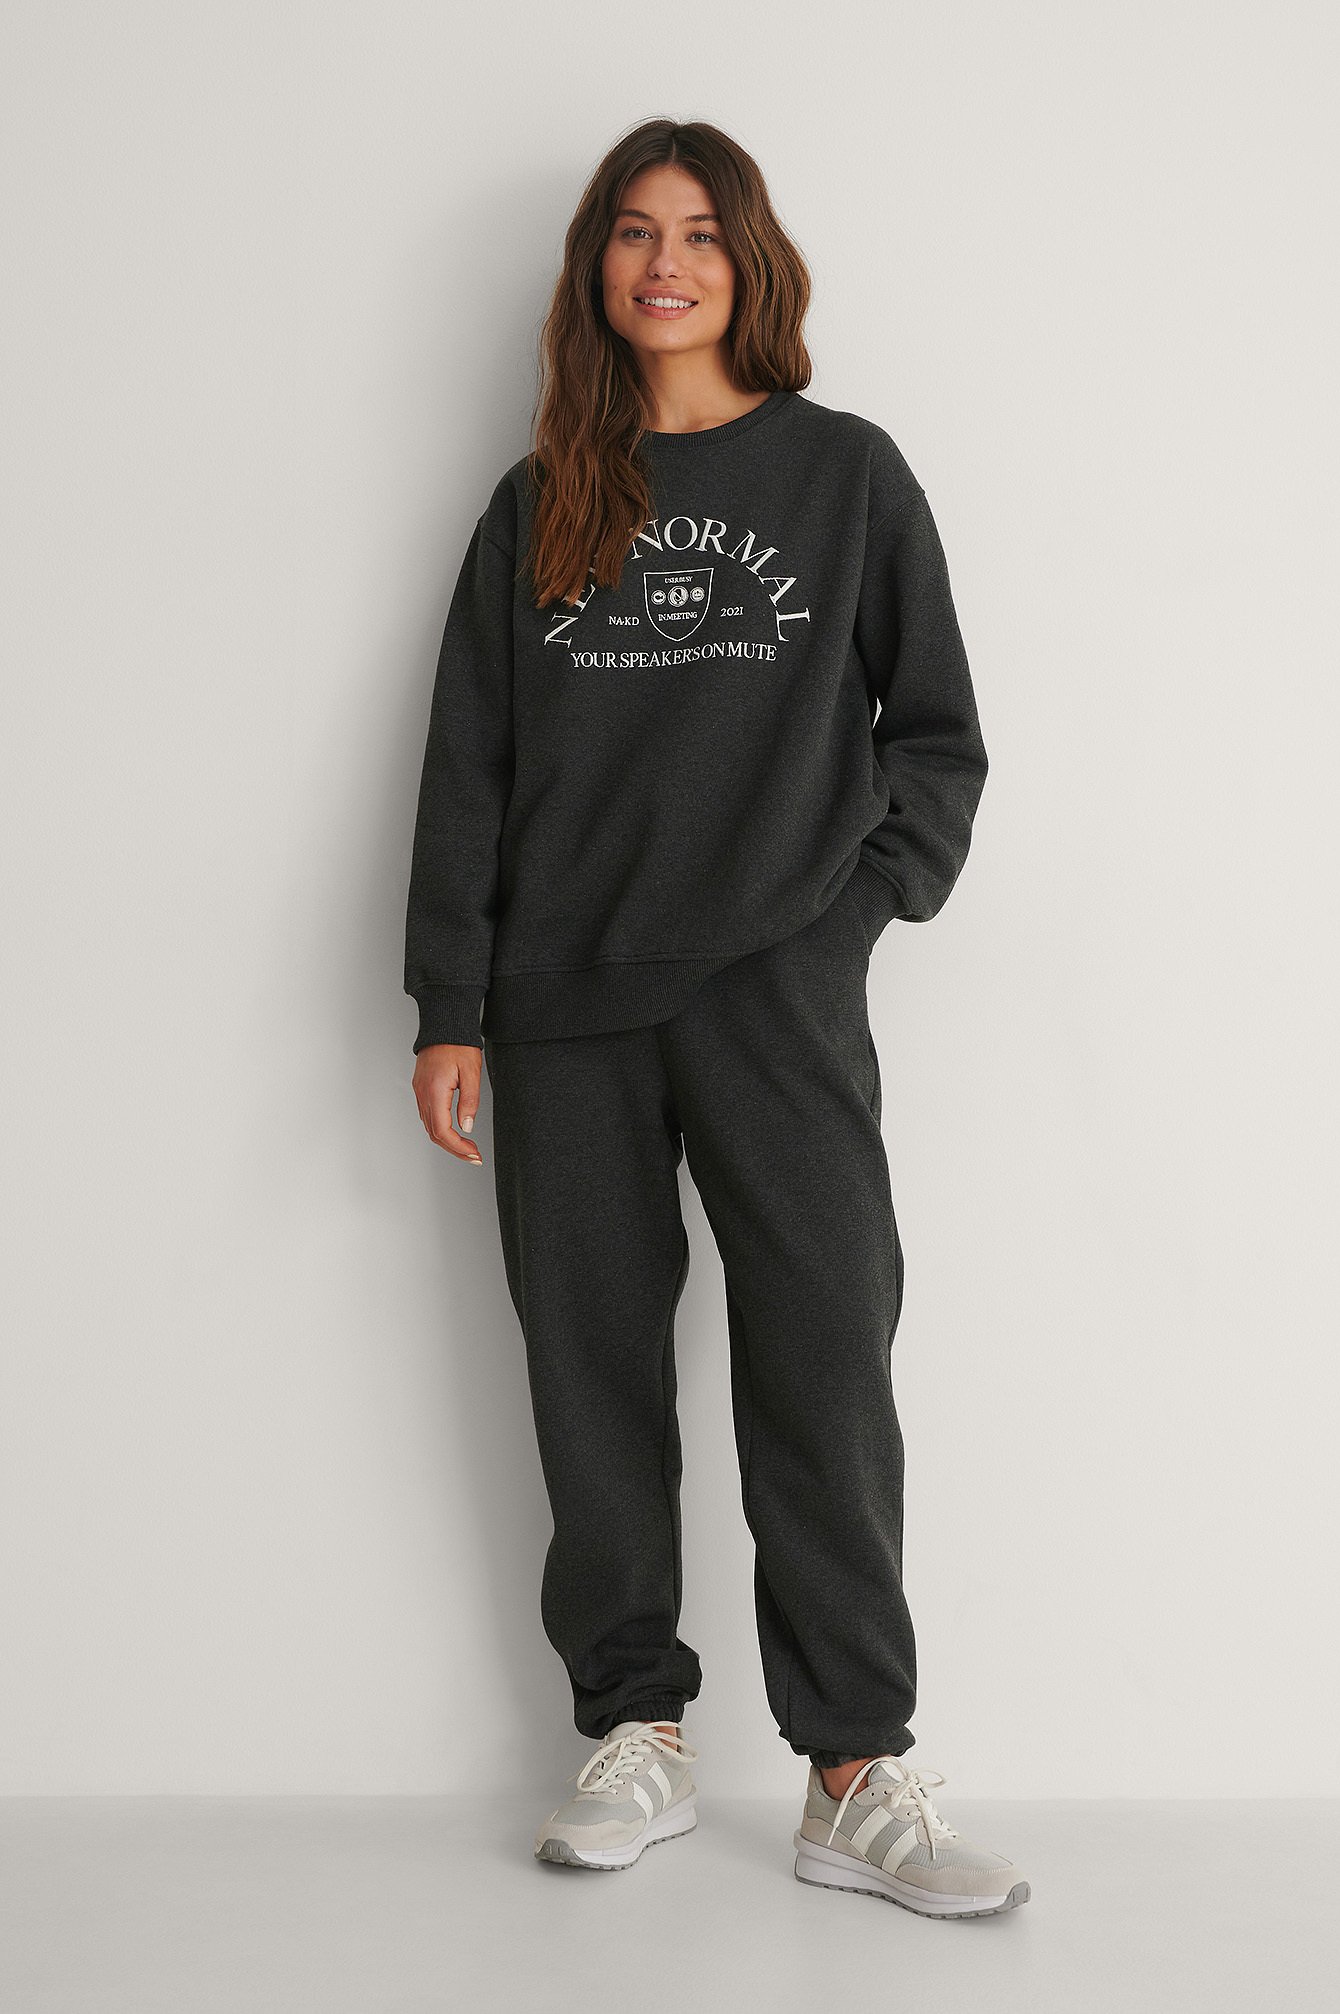 Embroidery Print Sweatshirt and sweatpants outfit